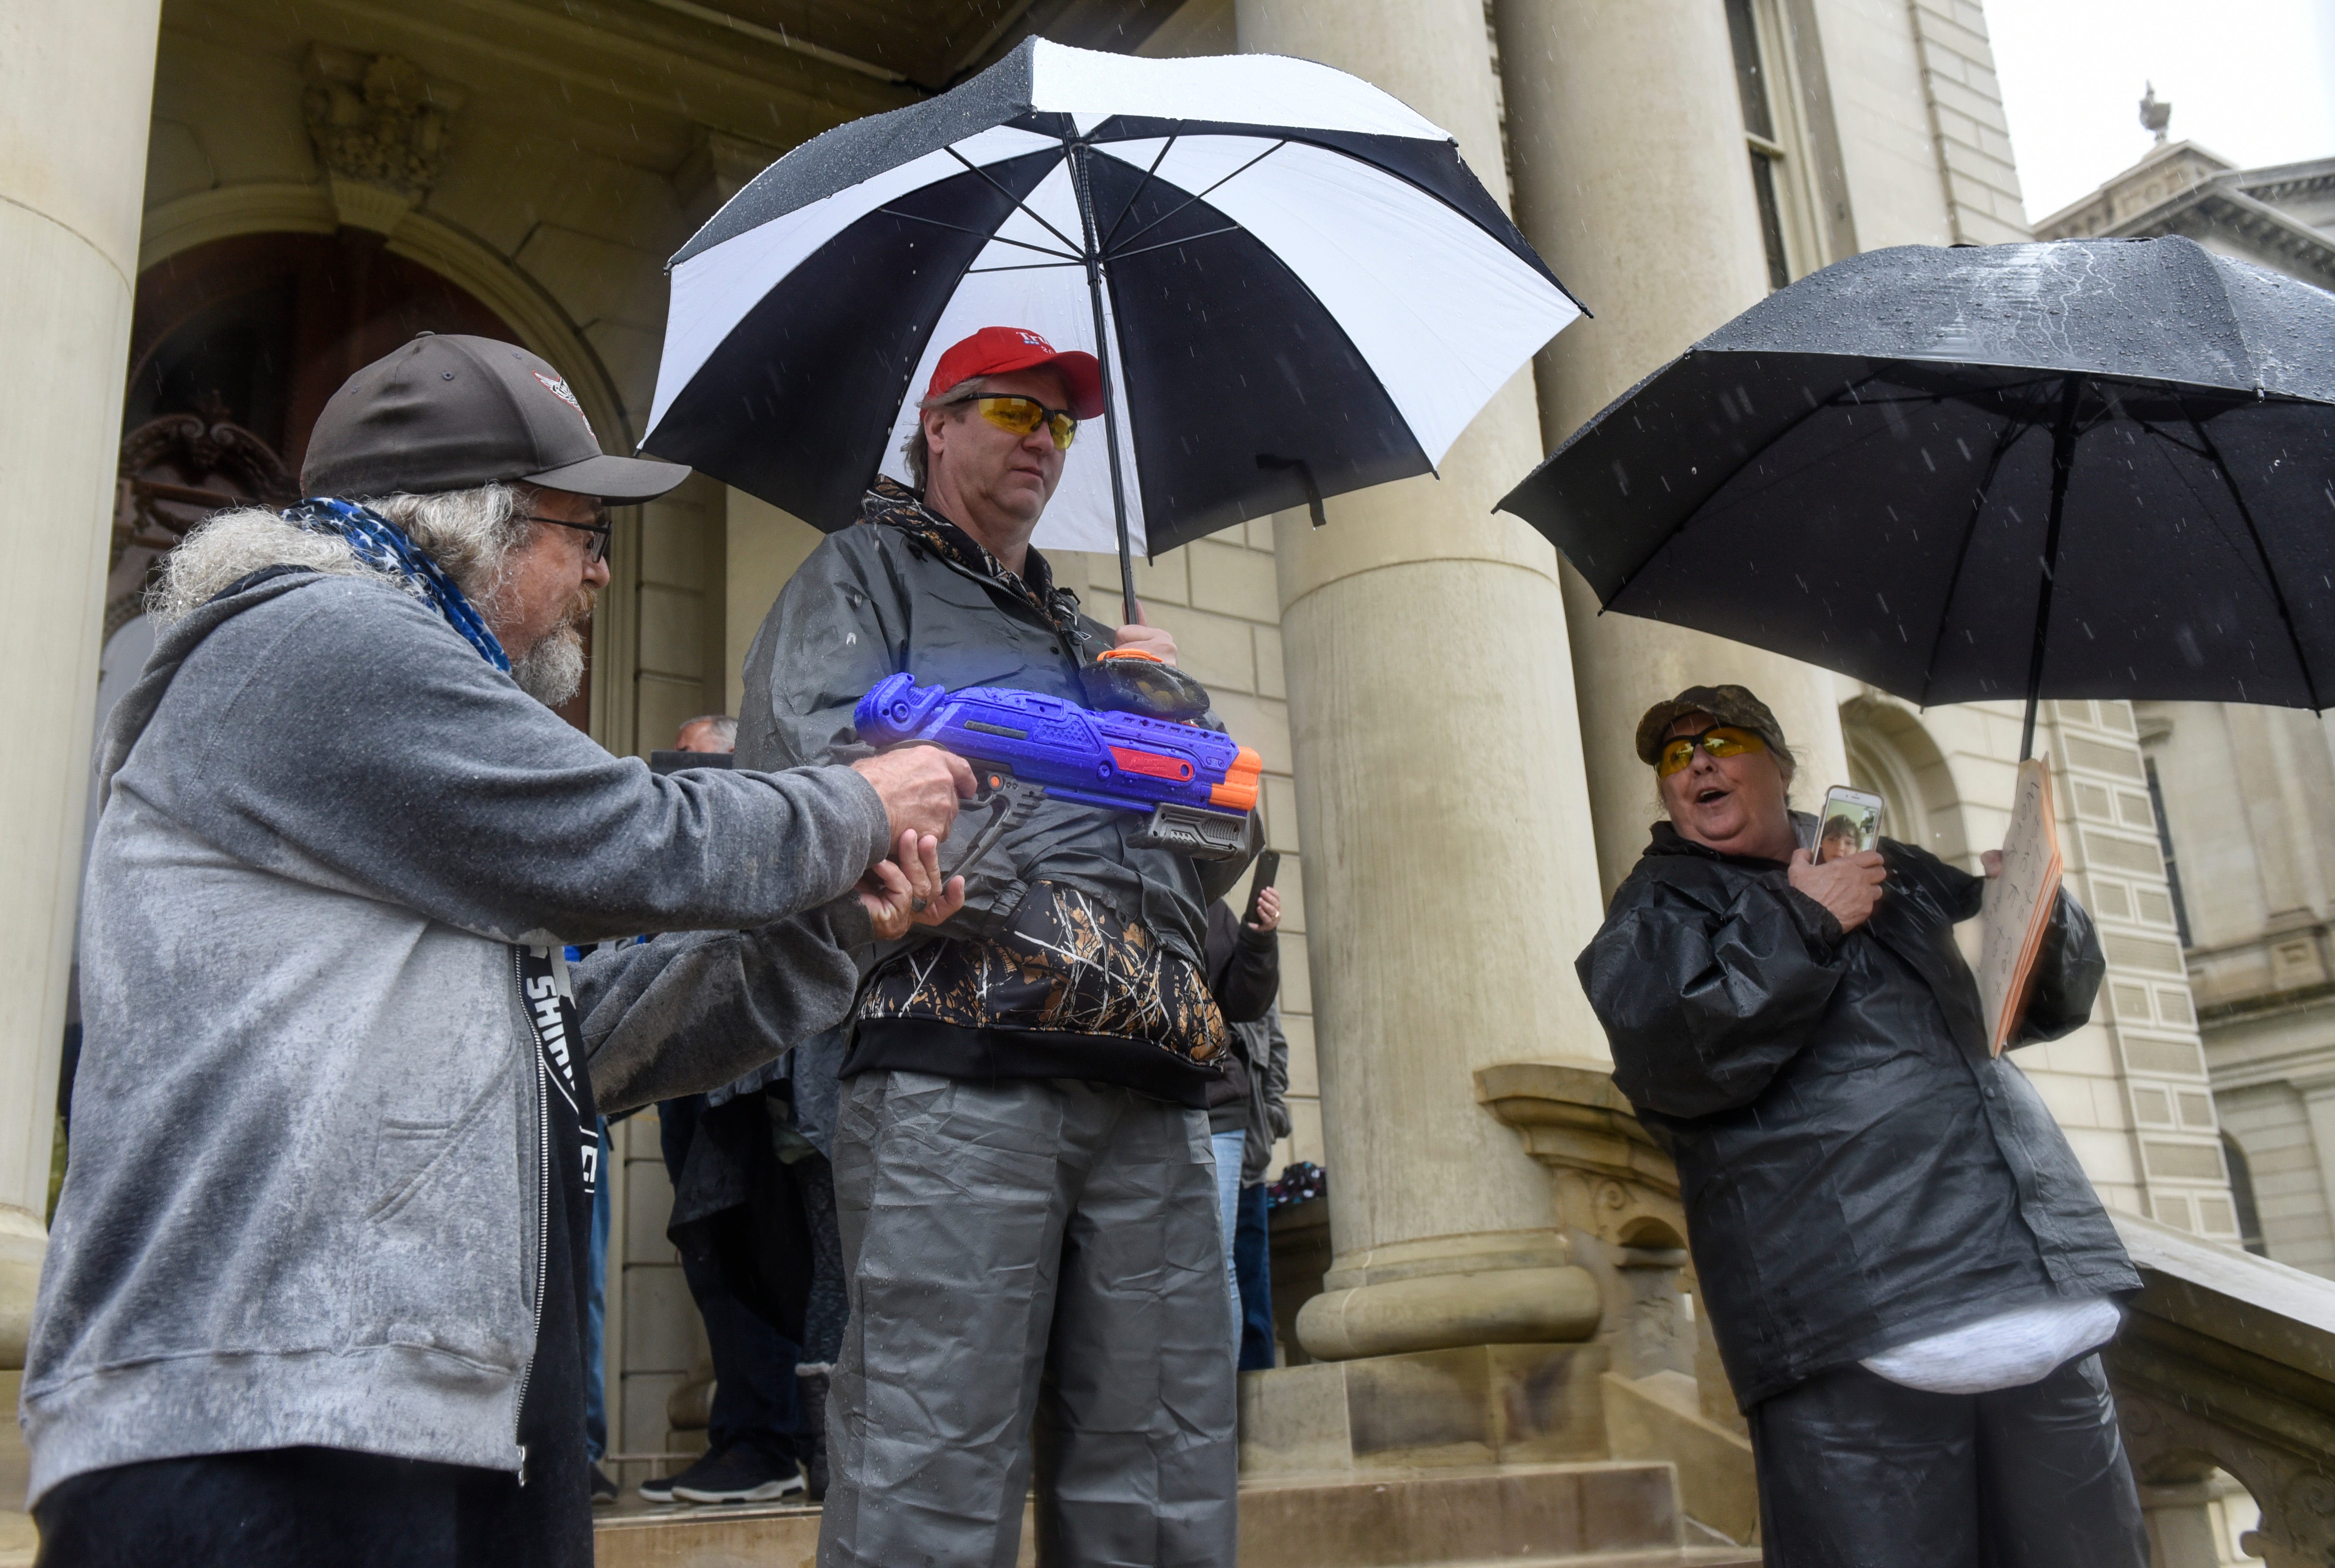 A man who says he founded the Michigan Nerf Militia to make fun of Michigan militias points a Nerf gun at protesters demonstrating in opposition to the executive orders Gov. Gretchen Whitmer issued in response to the coronavirus pandemic.